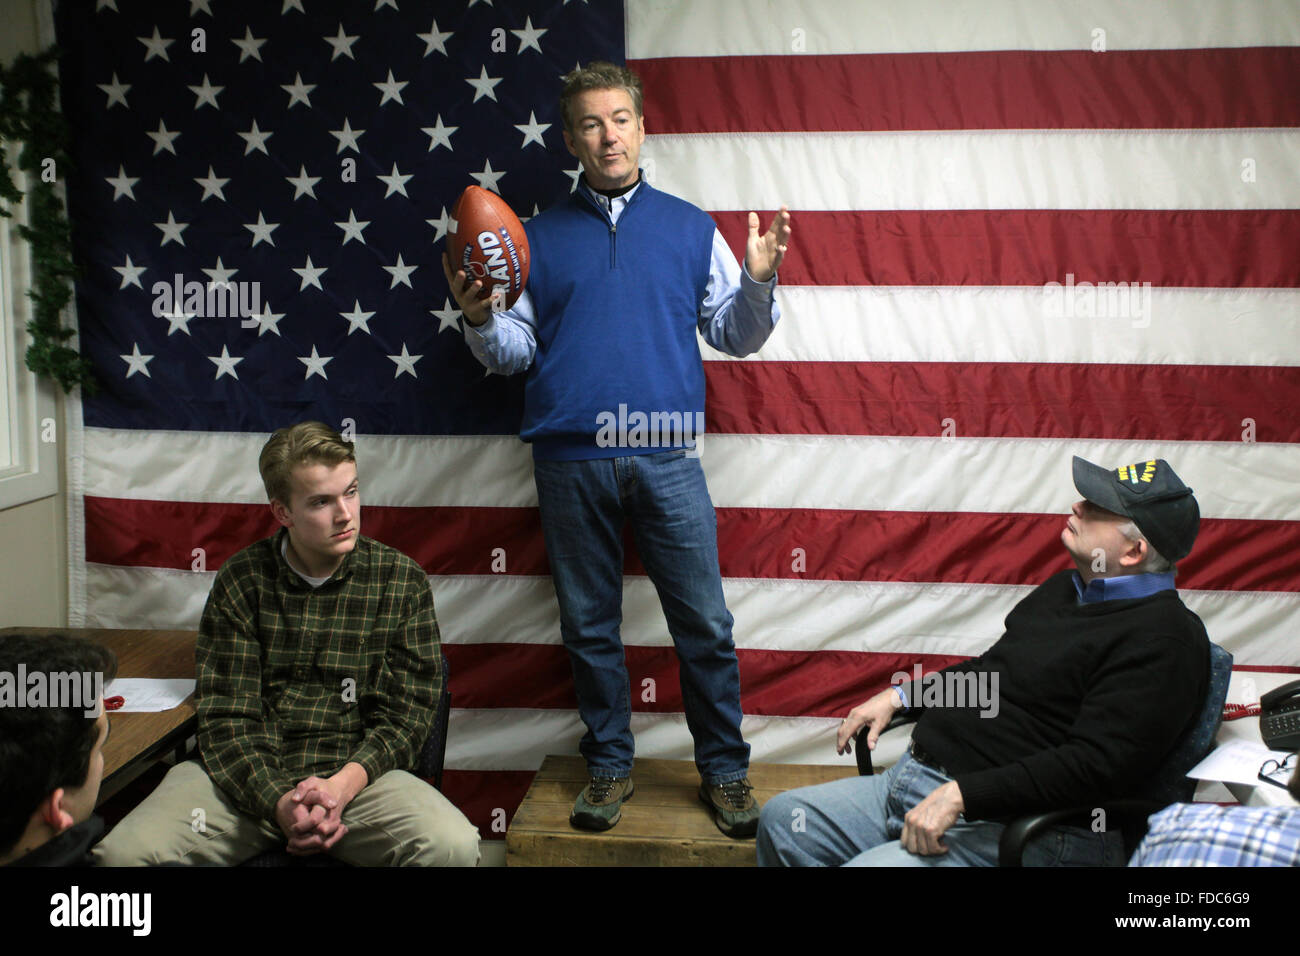 Senator Rand Paul and GOP presidential candidate addresses campaign volunteers while holding a football January 22, 2016 in Manchester, New Hampshire. Stock Photo